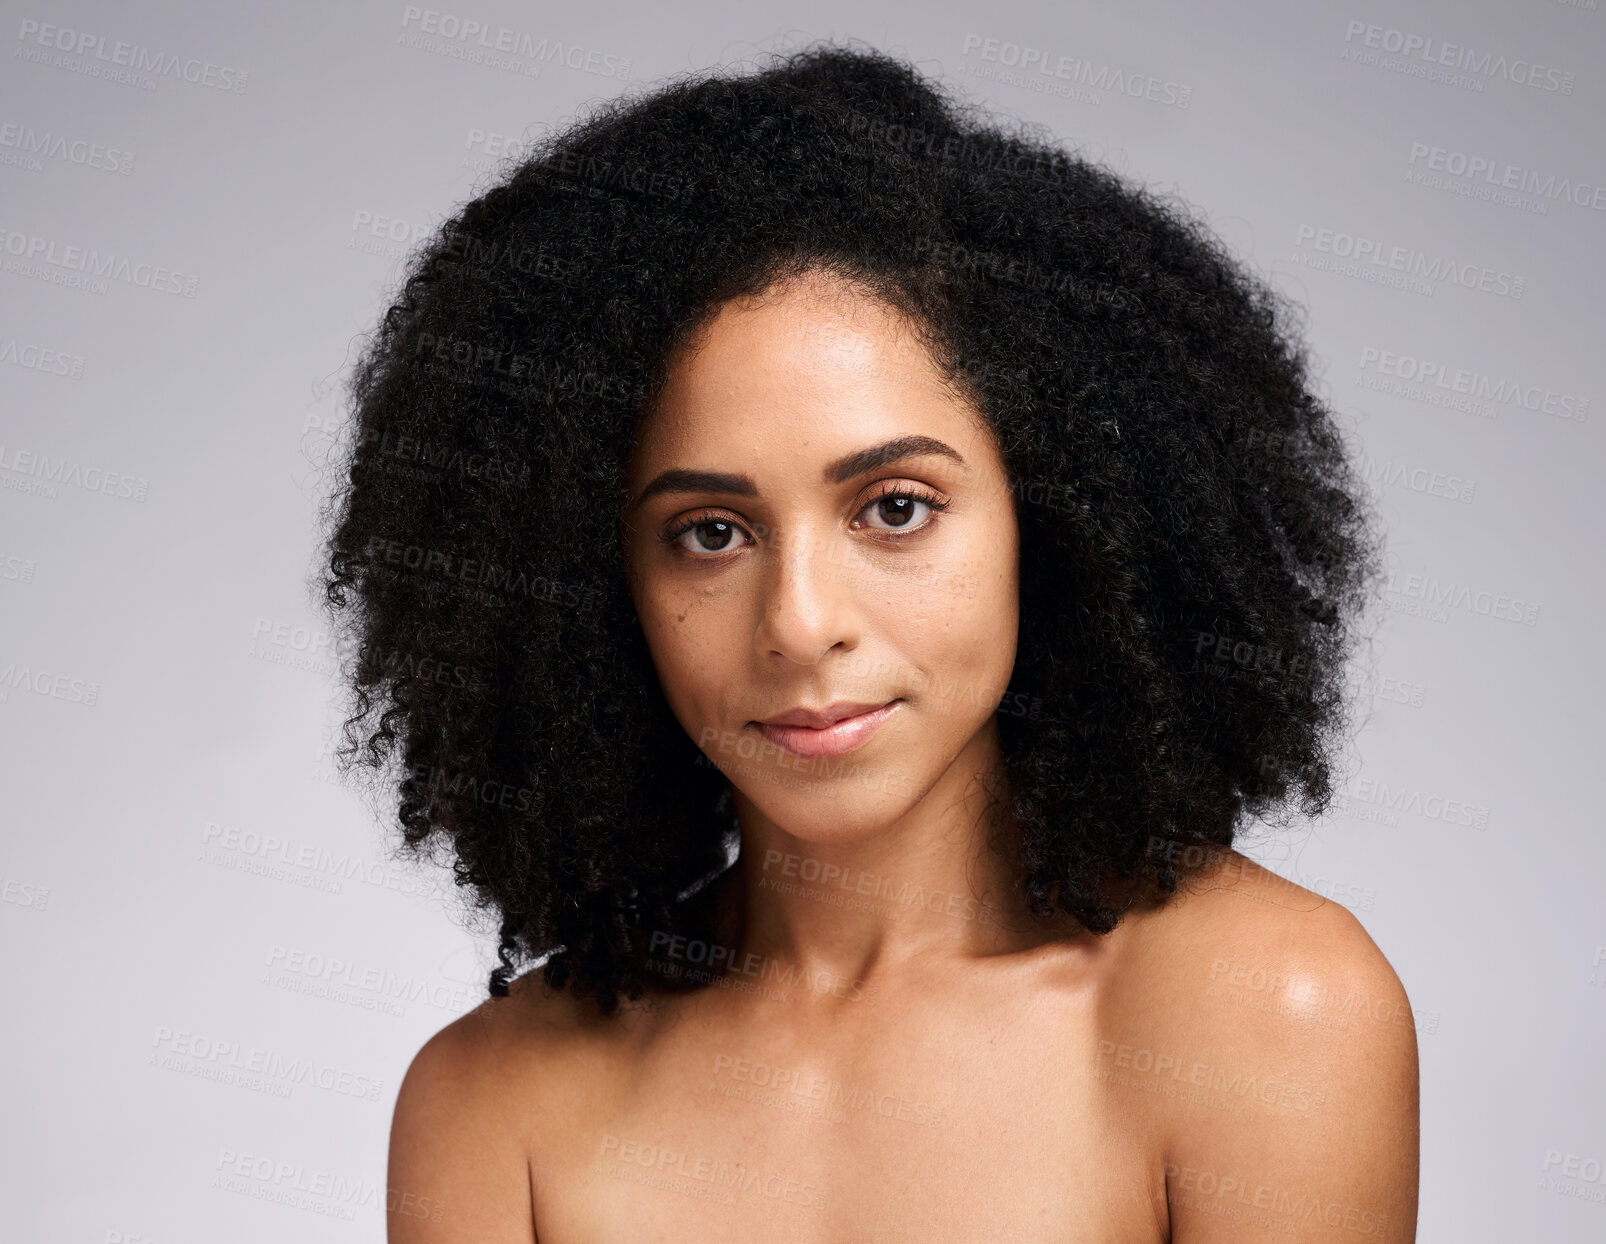 Buy stock photo Beauty, natural and portrait of hair care black woman with healthy skincare and afro texture. African hair grooming cosmetics model face with beautiful skin glow in gray studio background.

